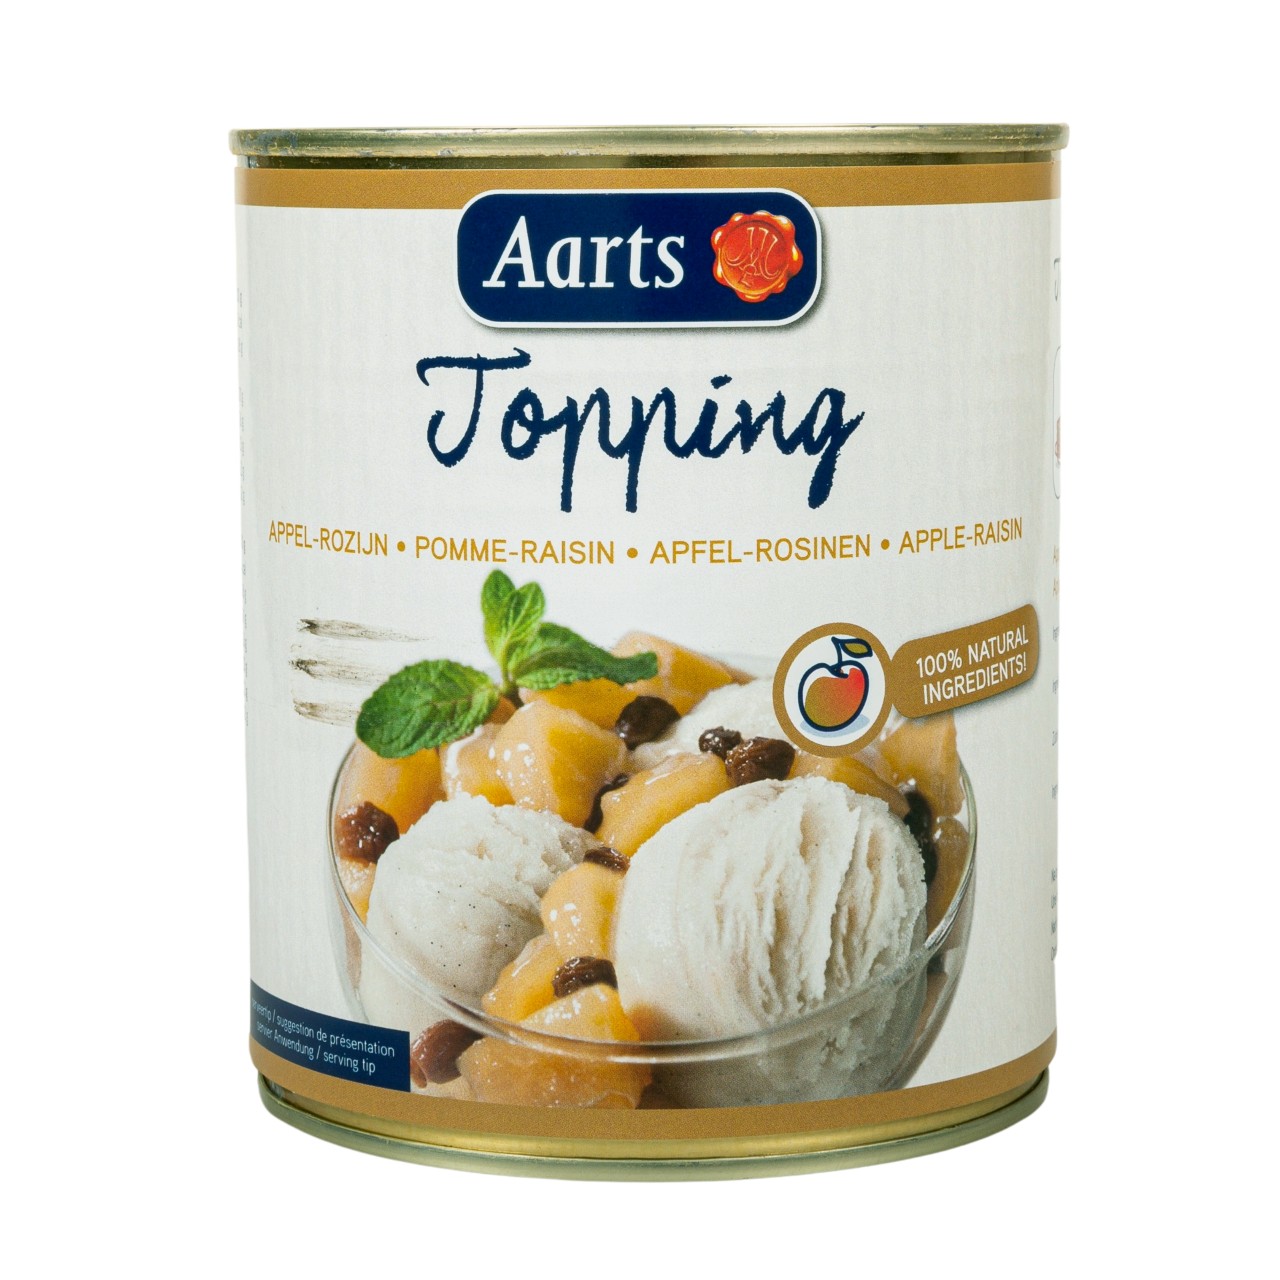 Appel rozijn topping